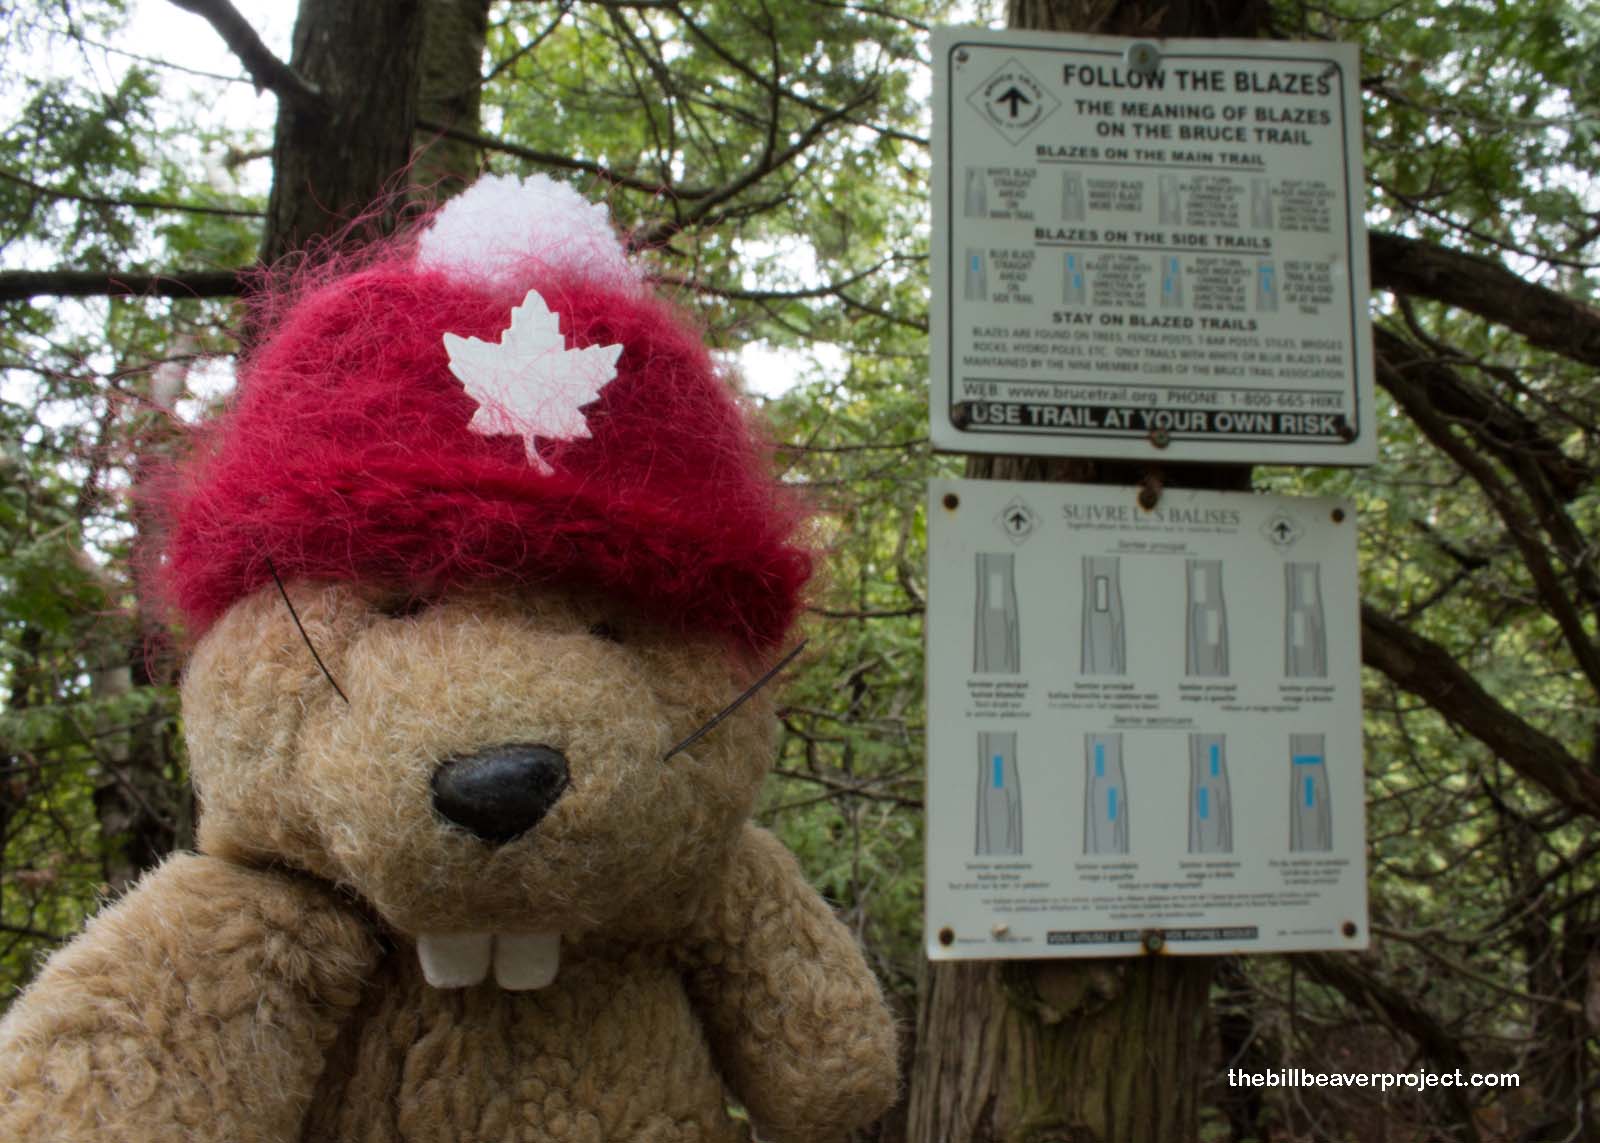 The Bruce Trail is marked by blazes, just like the Camino de Santiago!